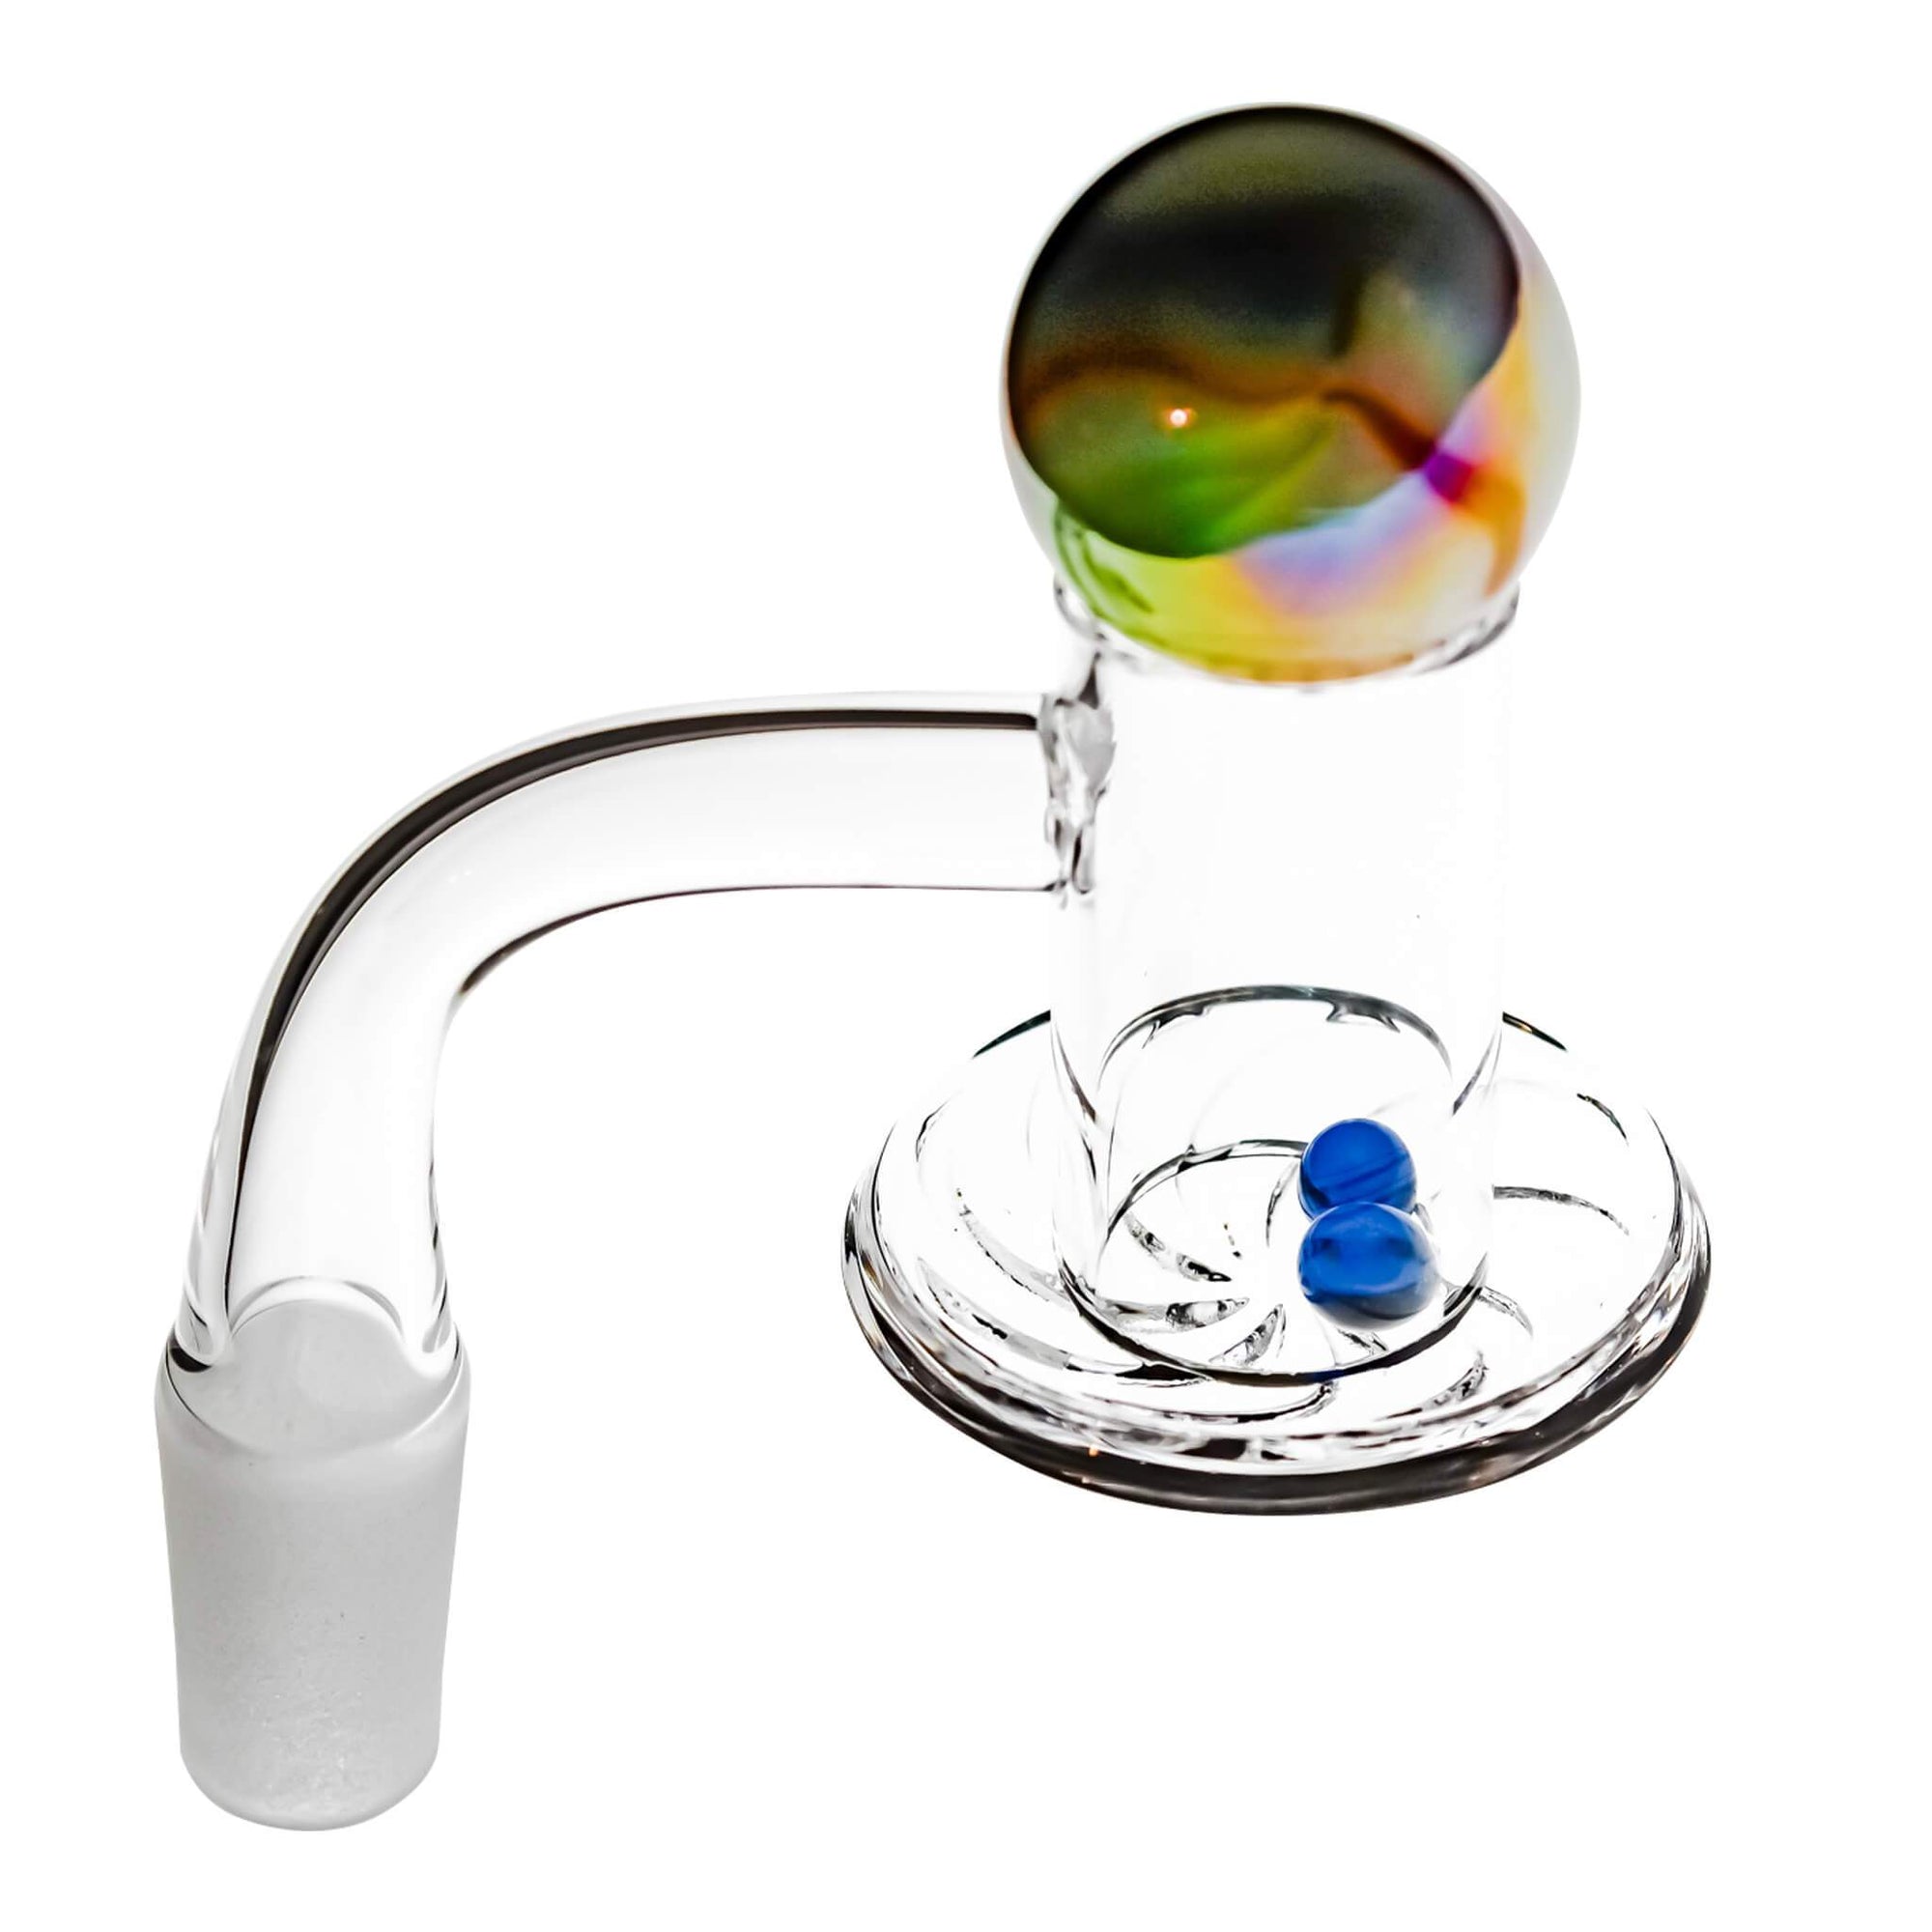 20mm Terp Blender Channel Slurp Kit | With Marble & Pearls | Dabbing Warehouse